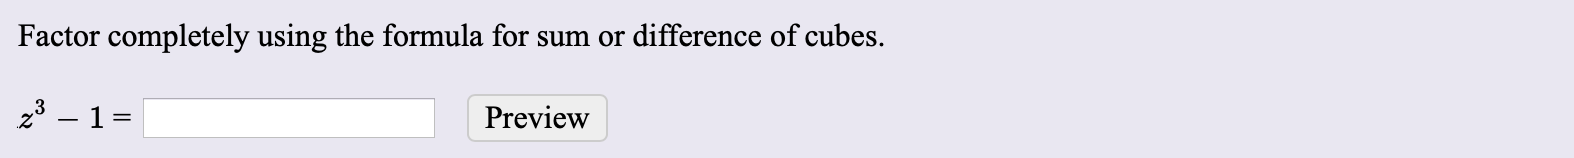 Factor completely using the formula for sum or difference of cubes
z 1=
Preview
